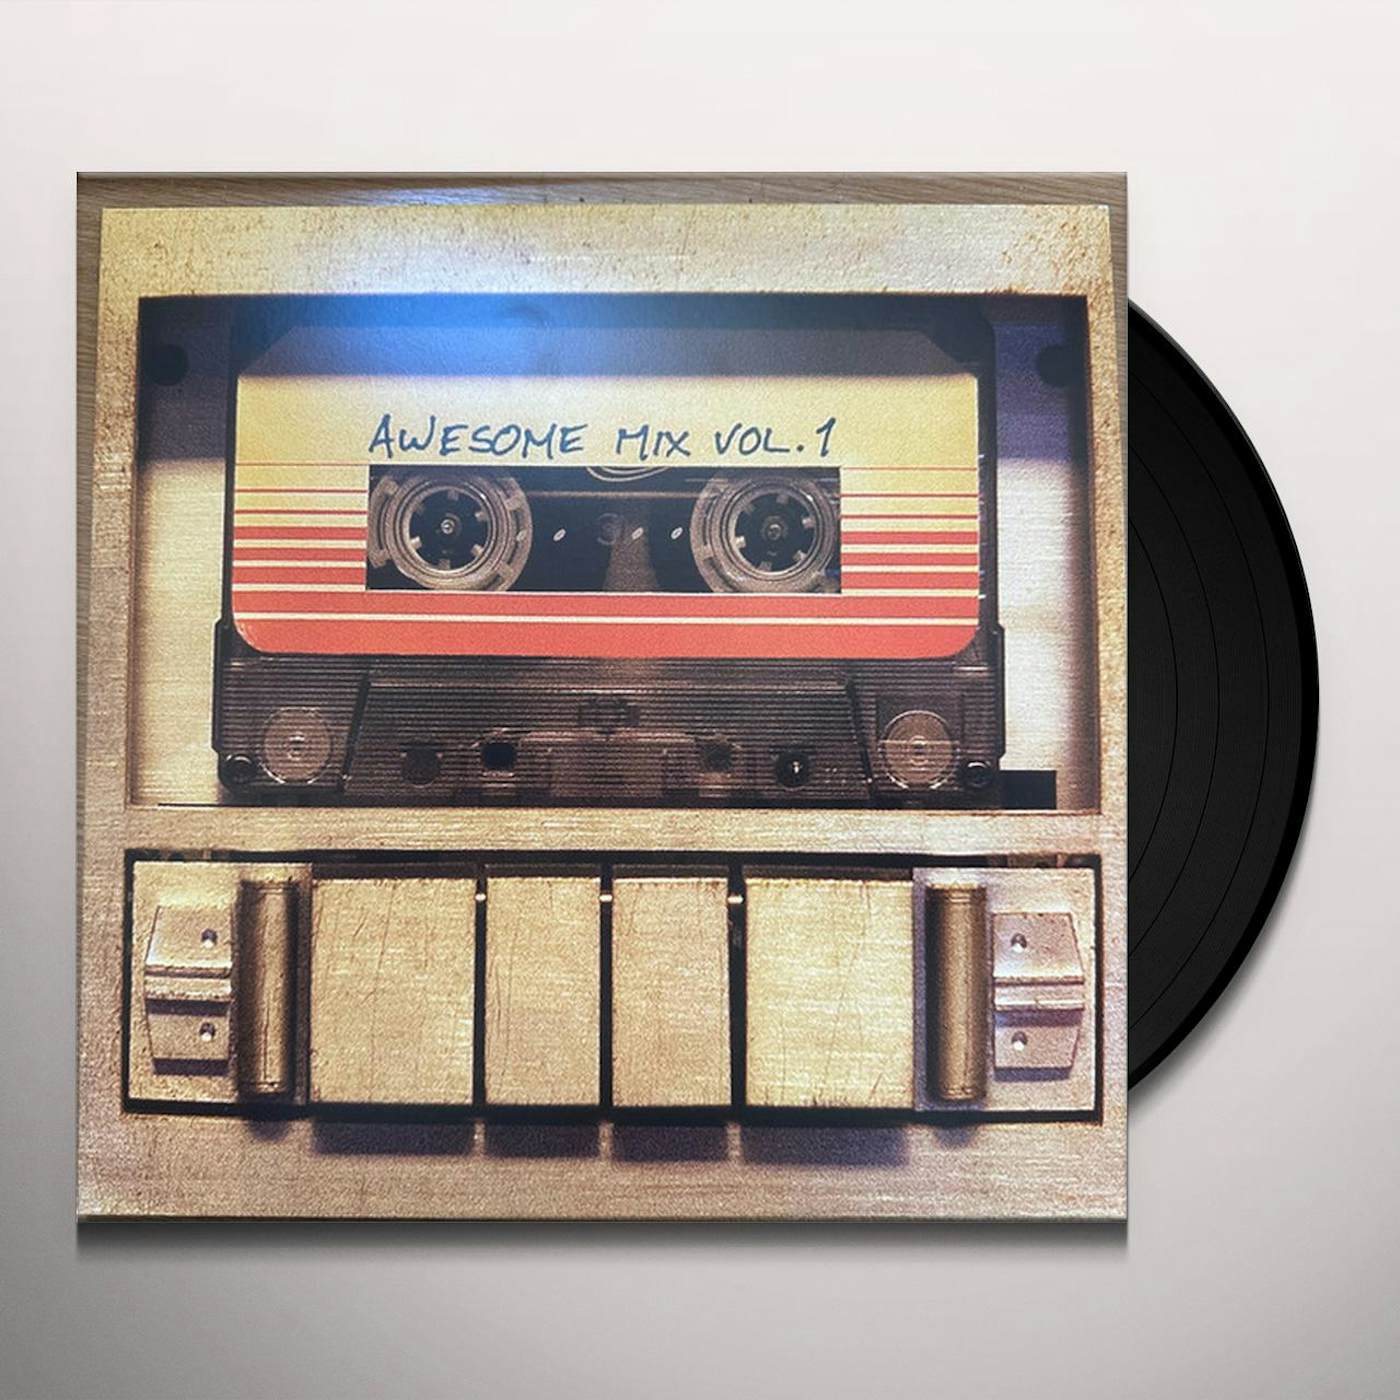 Various Artists - Stranger Things 4 (Soundtrack From The Netflix Serie –  Cromulent Records